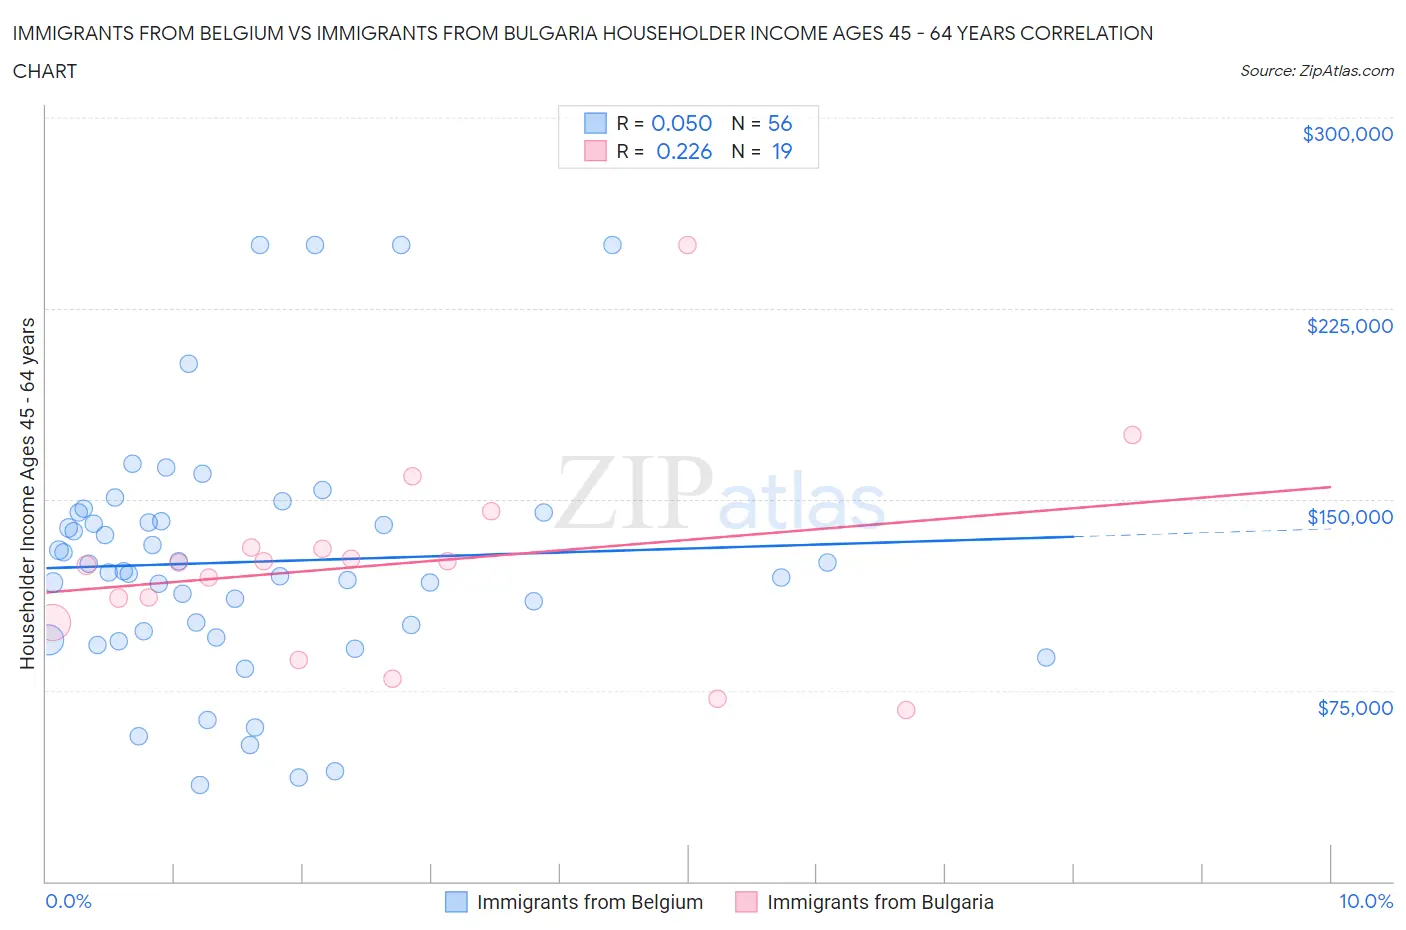 Immigrants from Belgium vs Immigrants from Bulgaria Householder Income Ages 45 - 64 years